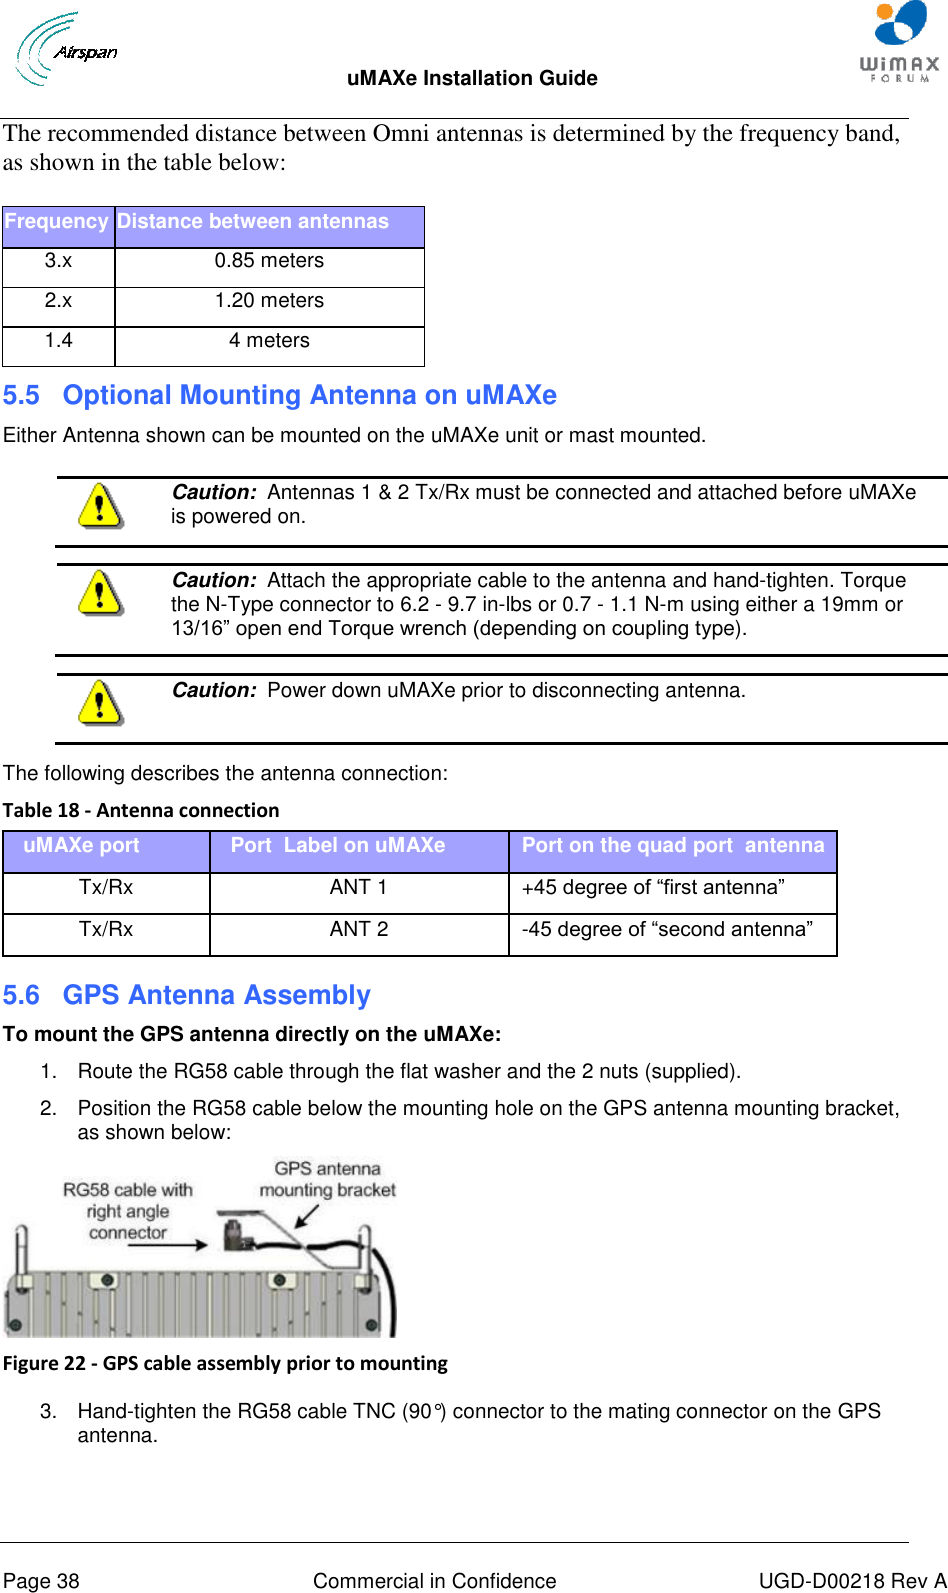  uMAXe Installation Guide       Page 38  Commercial in Confidence  UGD-D00218 Rev A The recommended distance between Omni antennas is determined by the frequency band, as shown in the table below: Frequency Distance between antennas 3.x 0.85 meters 2.x 1.20 meters 1.4 4 meters 5.5  Optional Mounting Antenna on uMAXe Either Antenna shown can be mounted on the uMAXe unit or mast mounted.   Caution:  Antennas 1 &amp; 2 Tx/Rx must be connected and attached before uMAXe is powered on.   Caution:  Attach the appropriate cable to the antenna and hand-tighten. Torque the N-Type connector to 6.2 - 9.7 in-lbs or 0.7 - 1.1 N-m using either a 19mm or 13/16” open end Torque wrench (depending on coupling type).   Caution:  Power down uMAXe prior to disconnecting antenna.   The following describes the antenna connection: Table 18 - Antenna connection uMAXe port Port  Label on uMAXe   Port on the quad port  antenna Tx/Rx ANT 1   +45 degree of “first antenna” Tx/Rx ANT 2   -45 degree of “second antenna”  5.6  GPS Antenna Assembly To mount the GPS antenna directly on the uMAXe: 1.  Route the RG58 cable through the flat washer and the 2 nuts (supplied). 2.  Position the RG58 cable below the mounting hole on the GPS antenna mounting bracket, as shown below:  Figure 22 - GPS cable assembly prior to mounting   3.  Hand-tighten the RG58 cable TNC (90°) connector to the mating connector on the GPS antenna. 